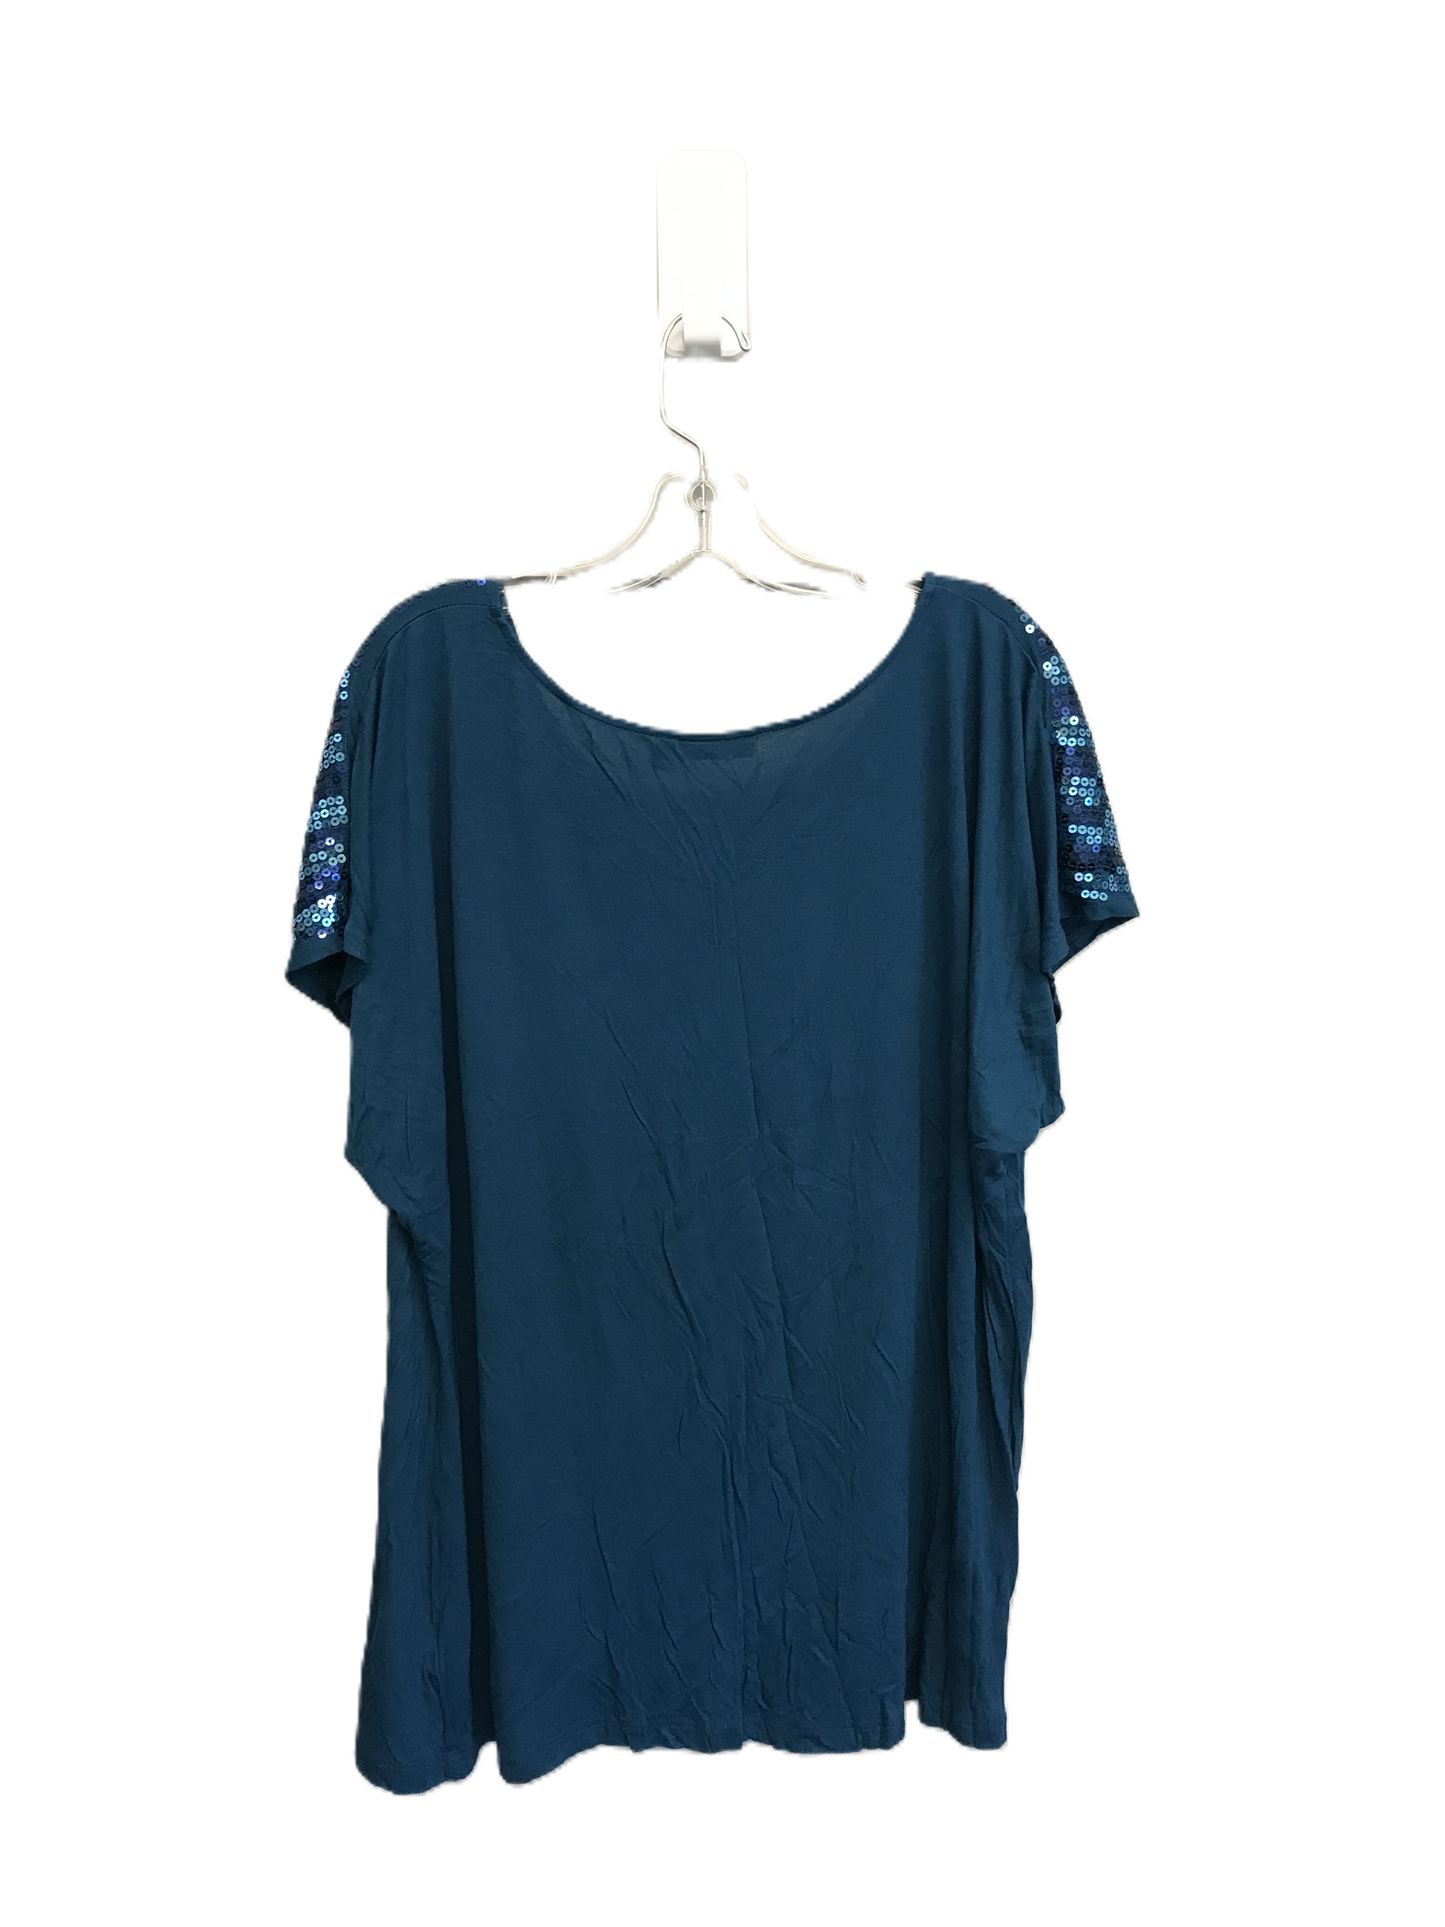 Blue Top Short Sleeve By Apt 9, Size: 2x